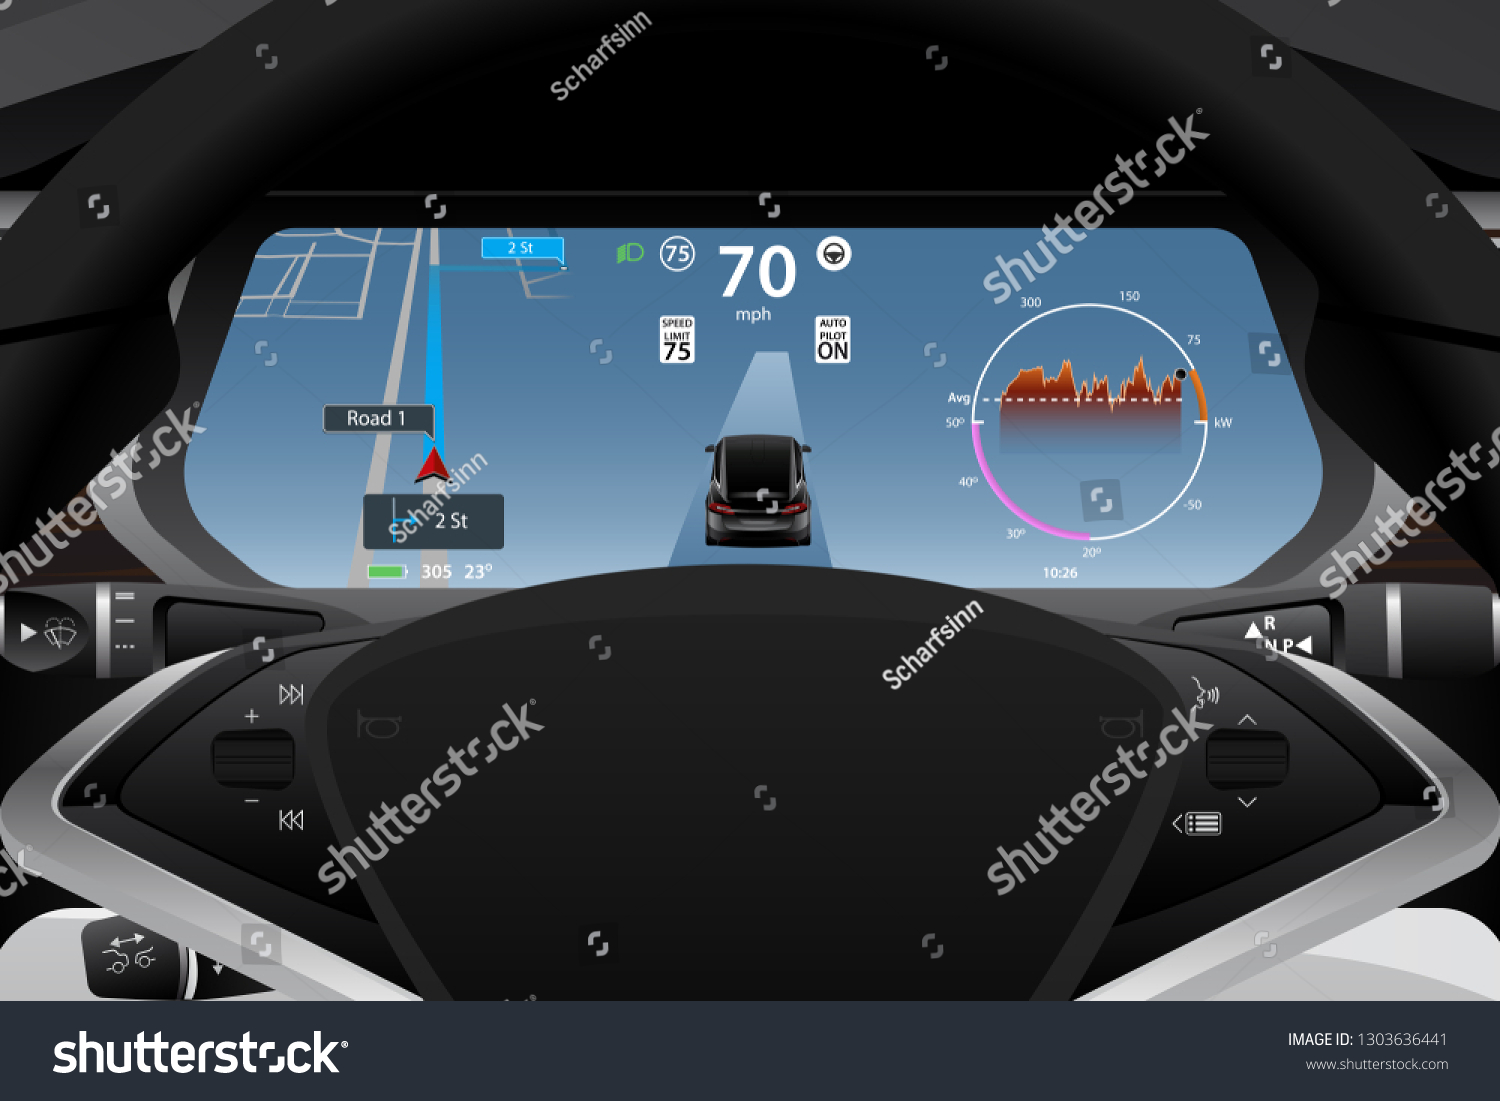 Self Driving Electric Car Dashboard Display Stock Vector (Royalty Free